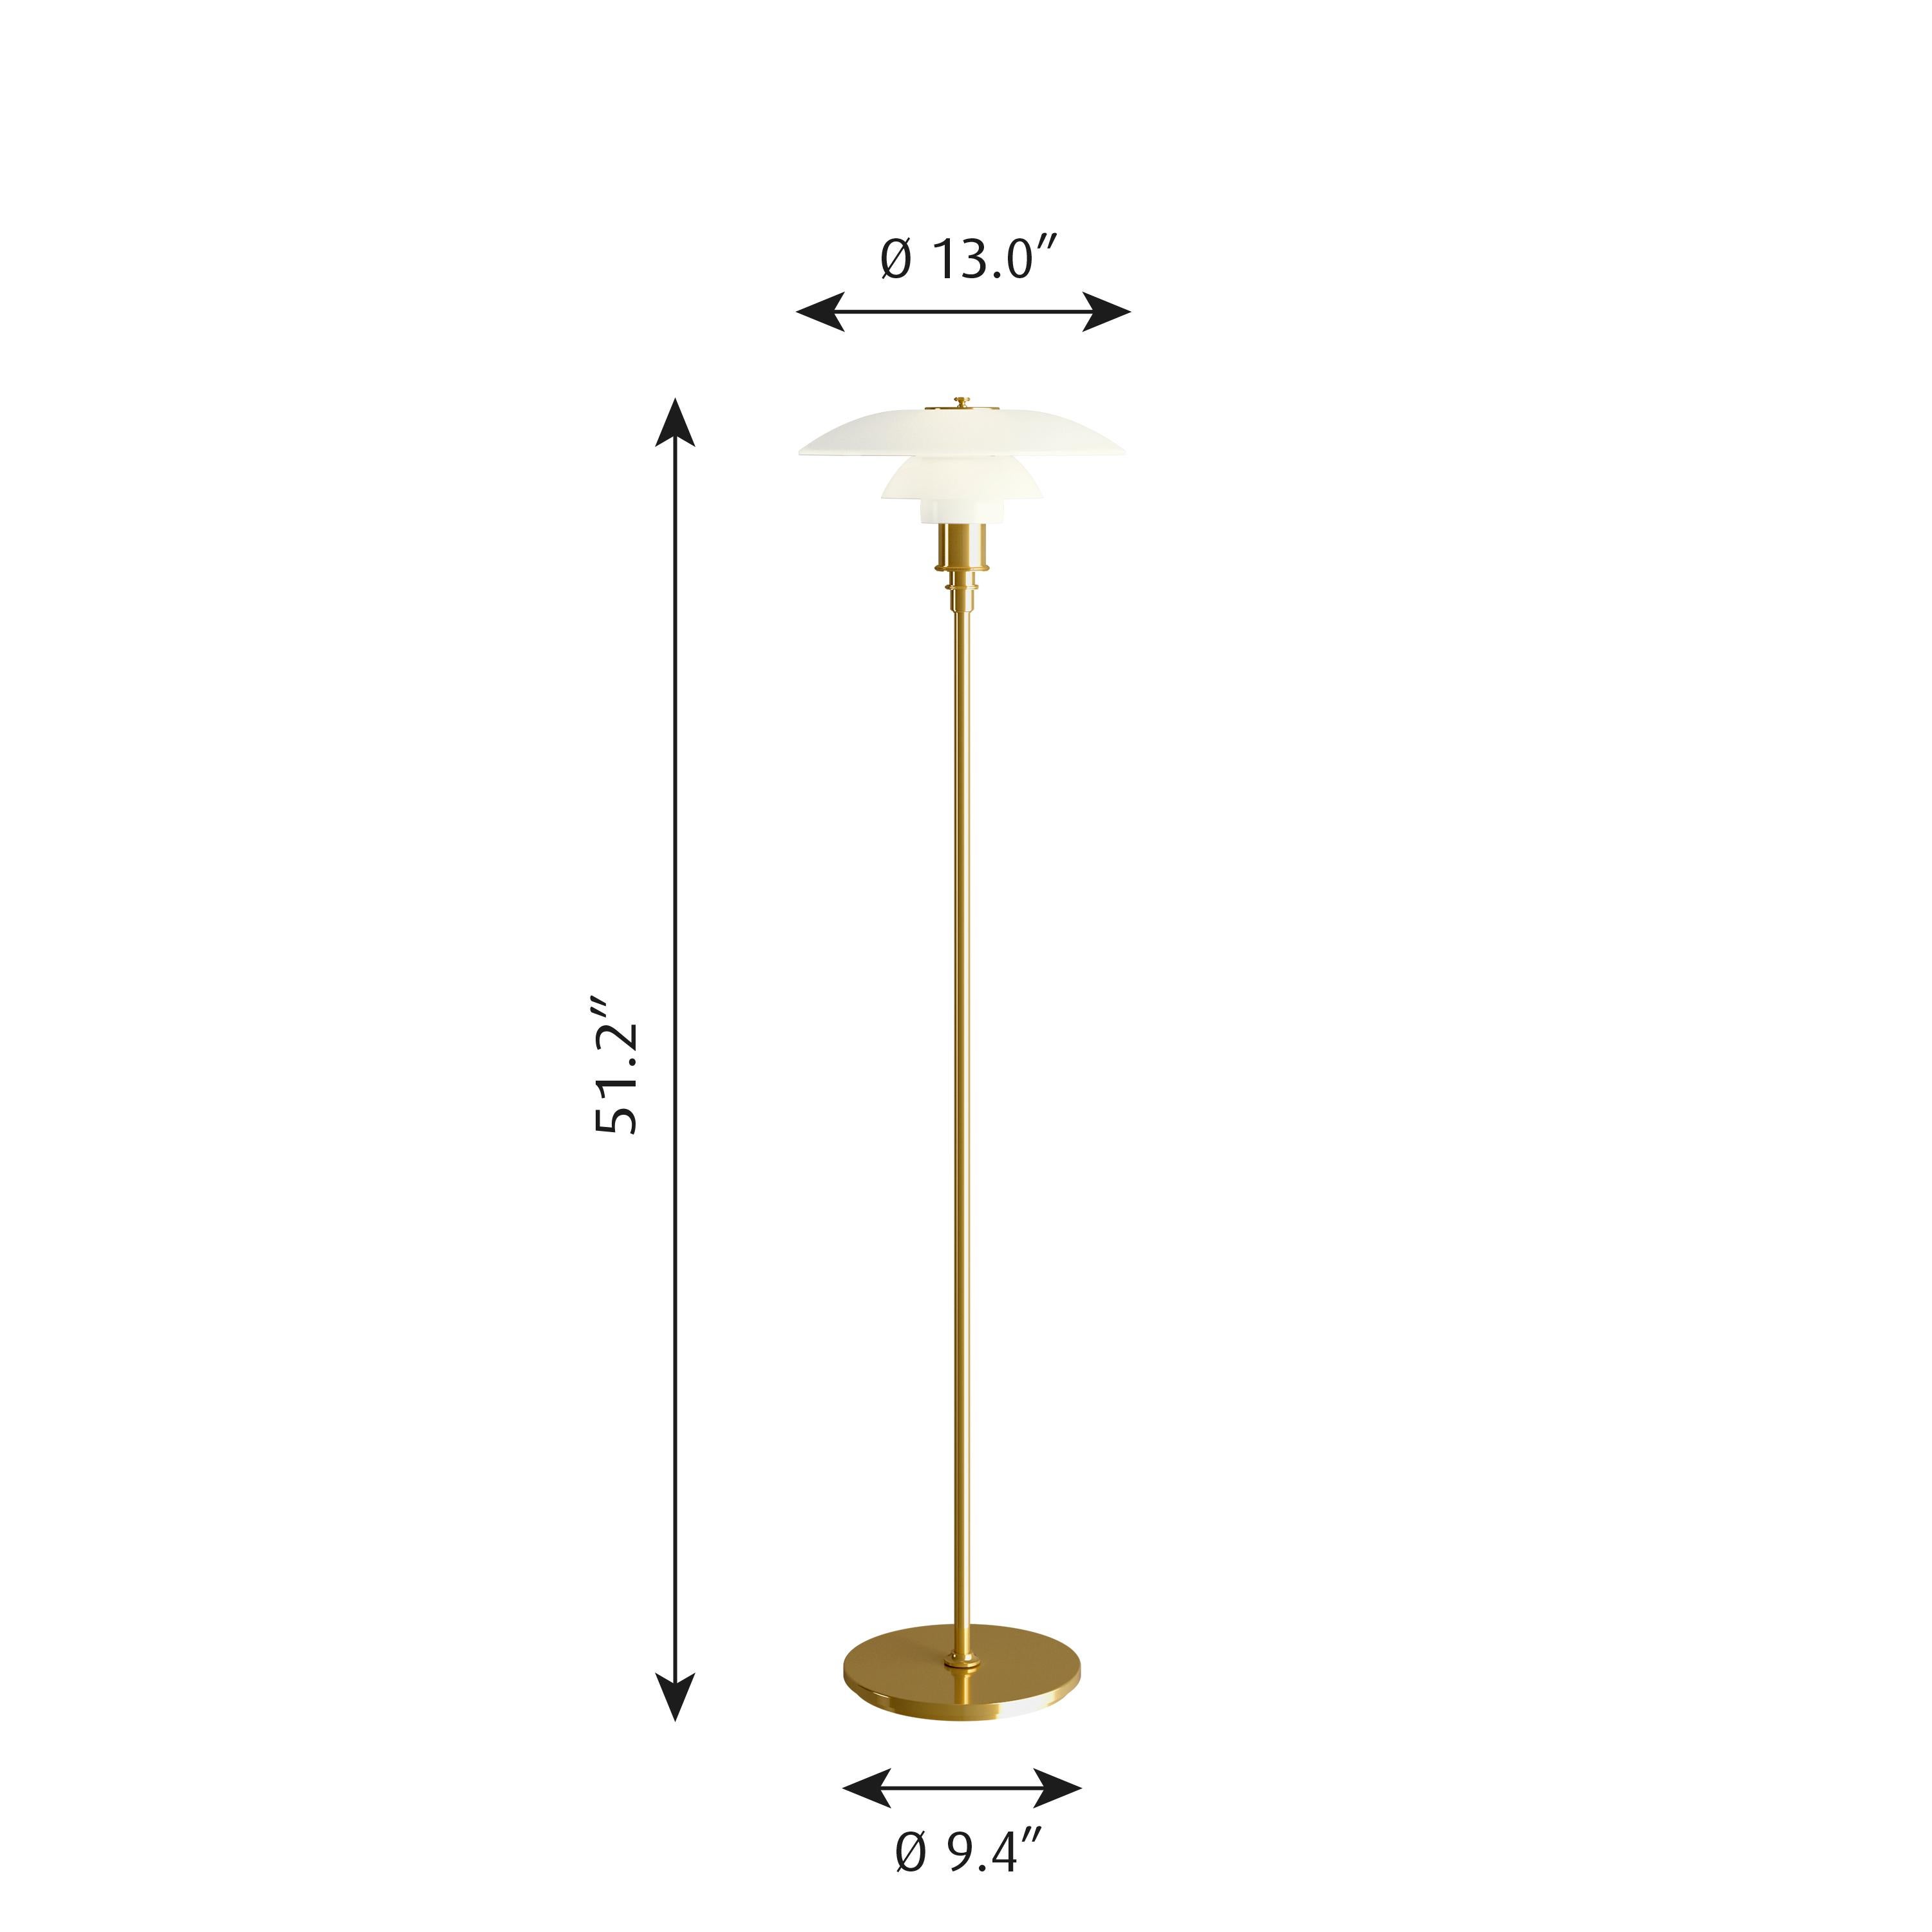 Poul Henningsen brass and glass PH 3½-2½ floor lamp for Louis Poulsen. Executed in white opal glass and a brass, chrome or black metallized frame. The Industrial look of the black metallized surface offers a bold, understated look, while the chrome